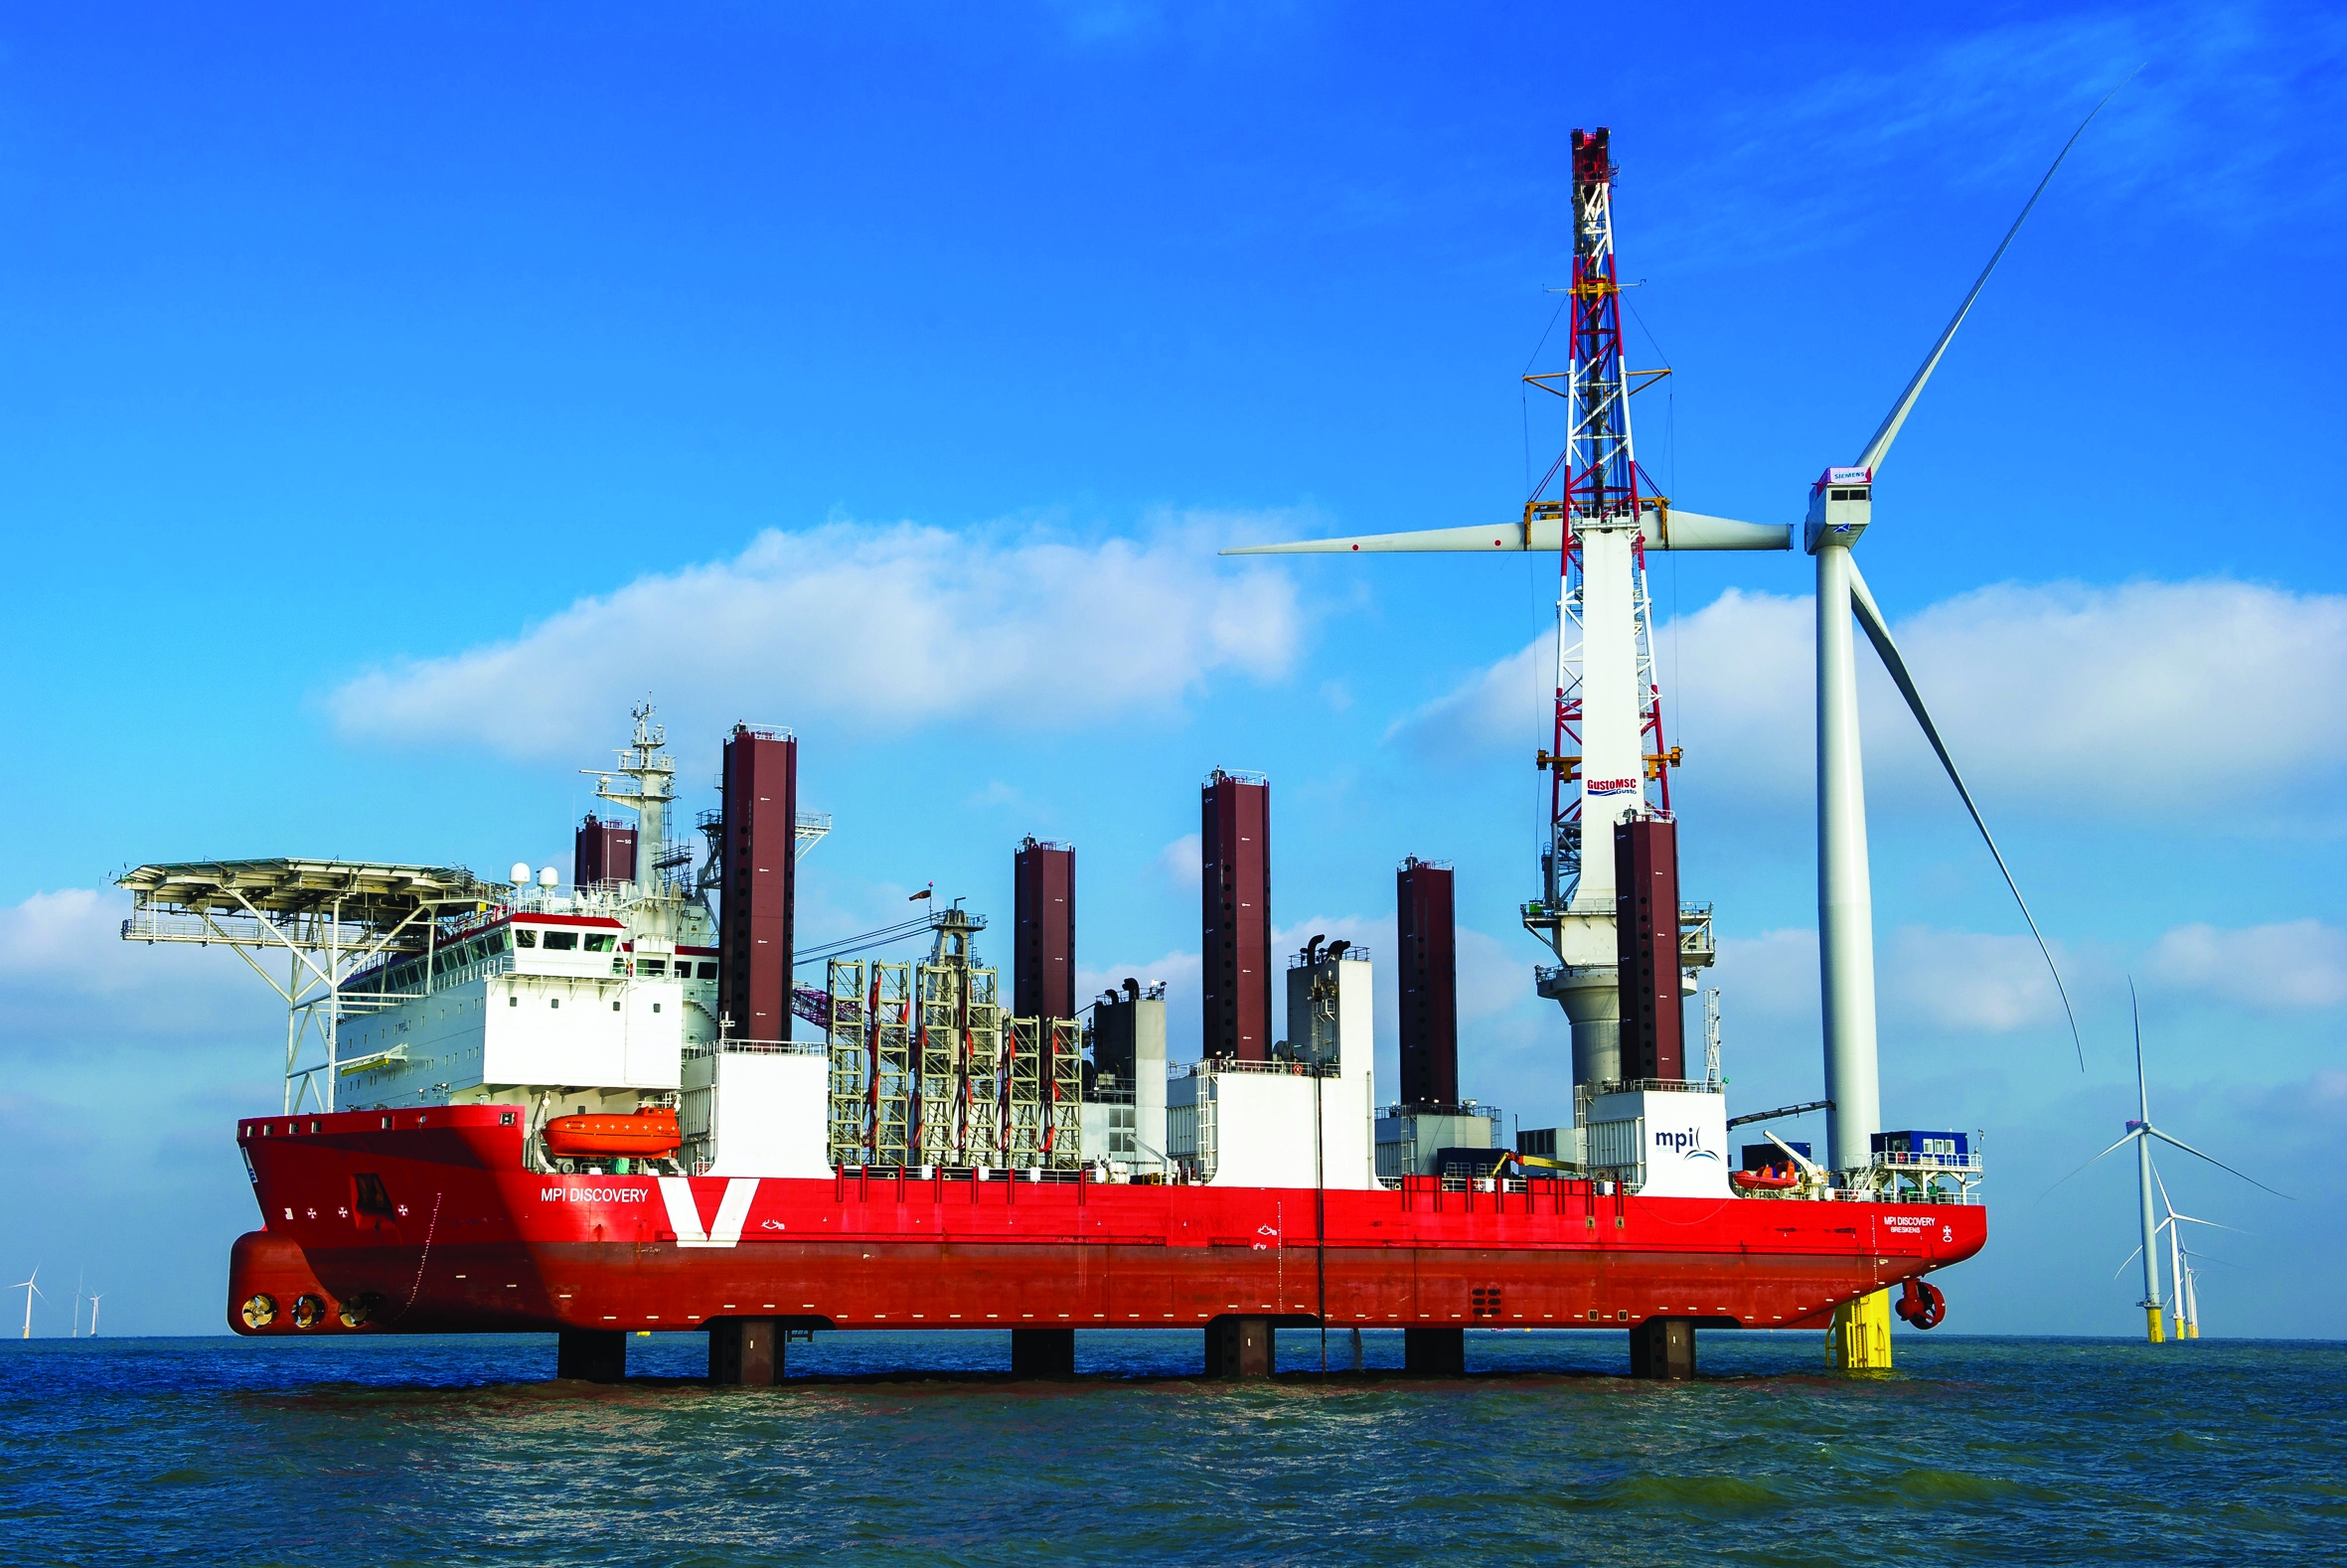 1.2GW of offshore and onshore wind was installed last year